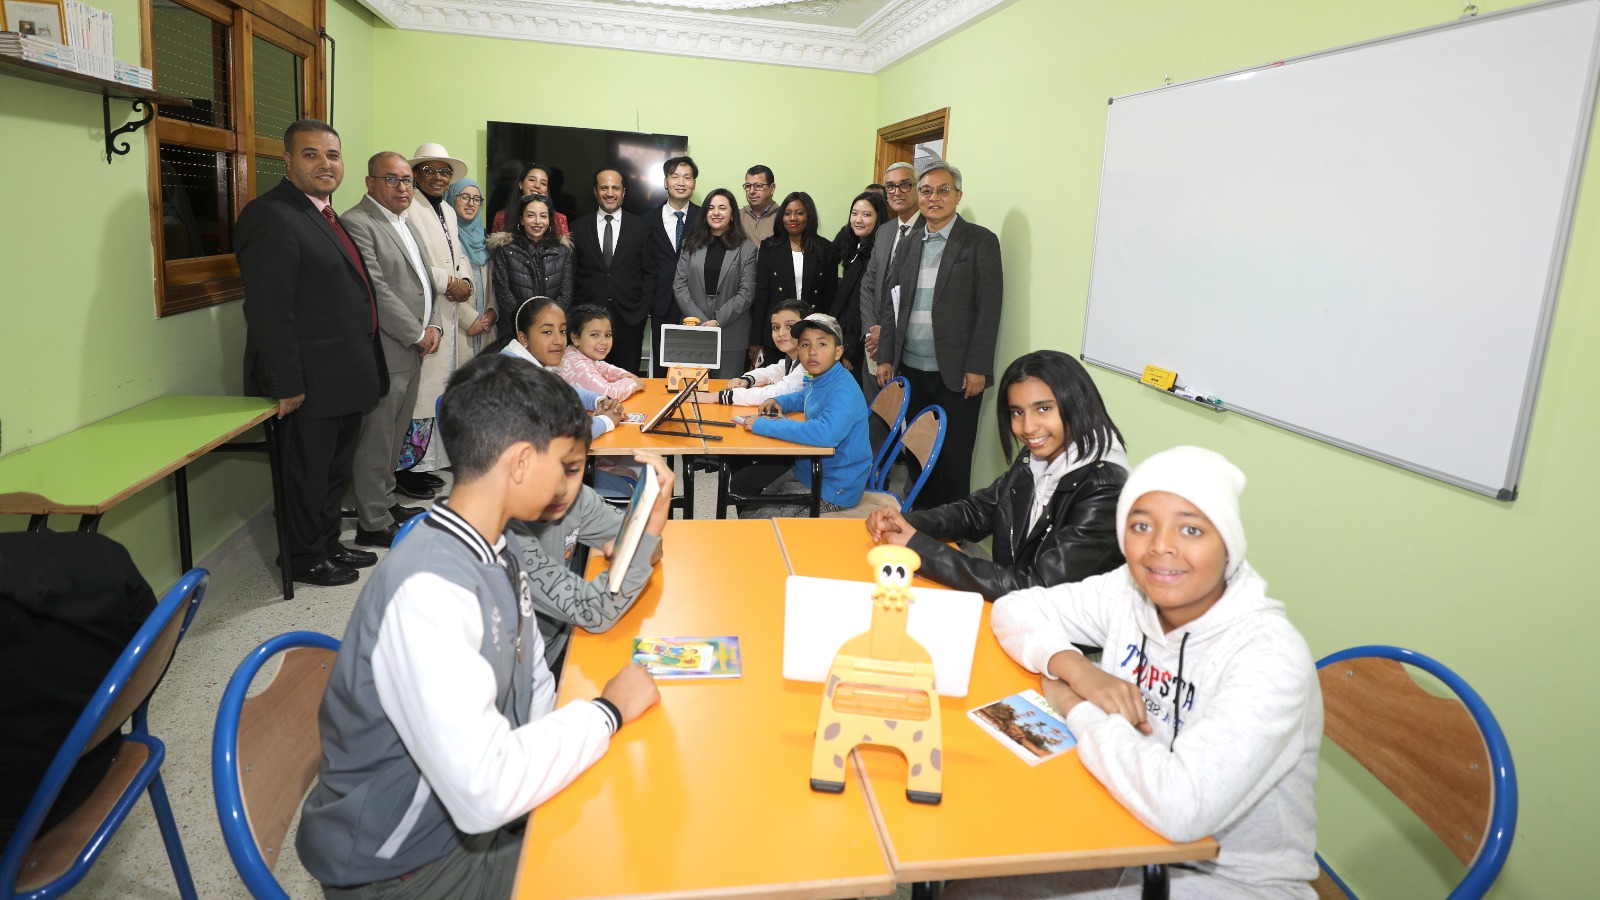 ICESCO delegation visits Children’s Library and e-Learning Center in Salé, Morocco